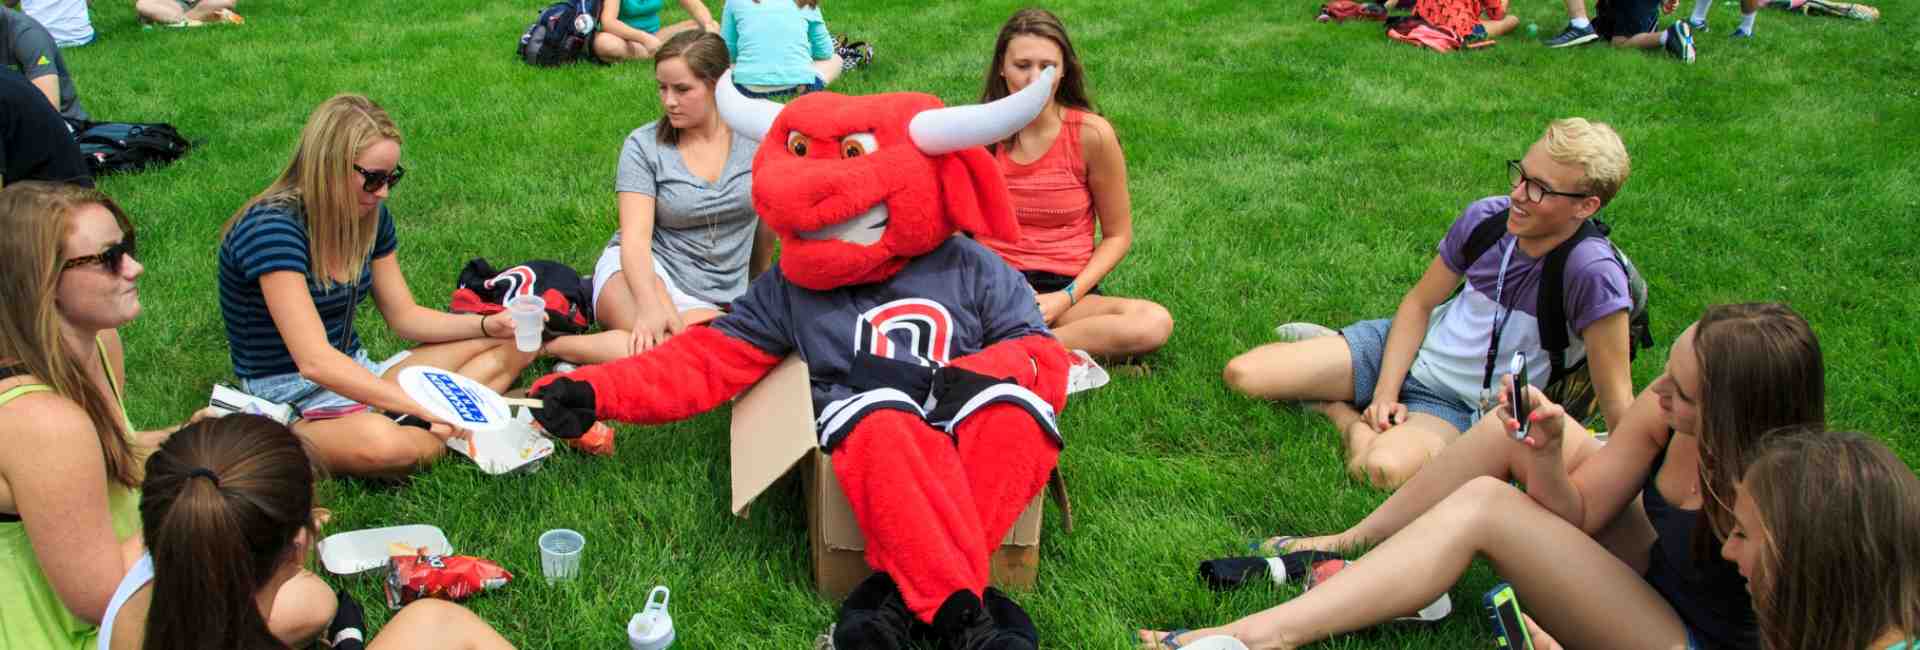 Durango relaxes with students on first day of school